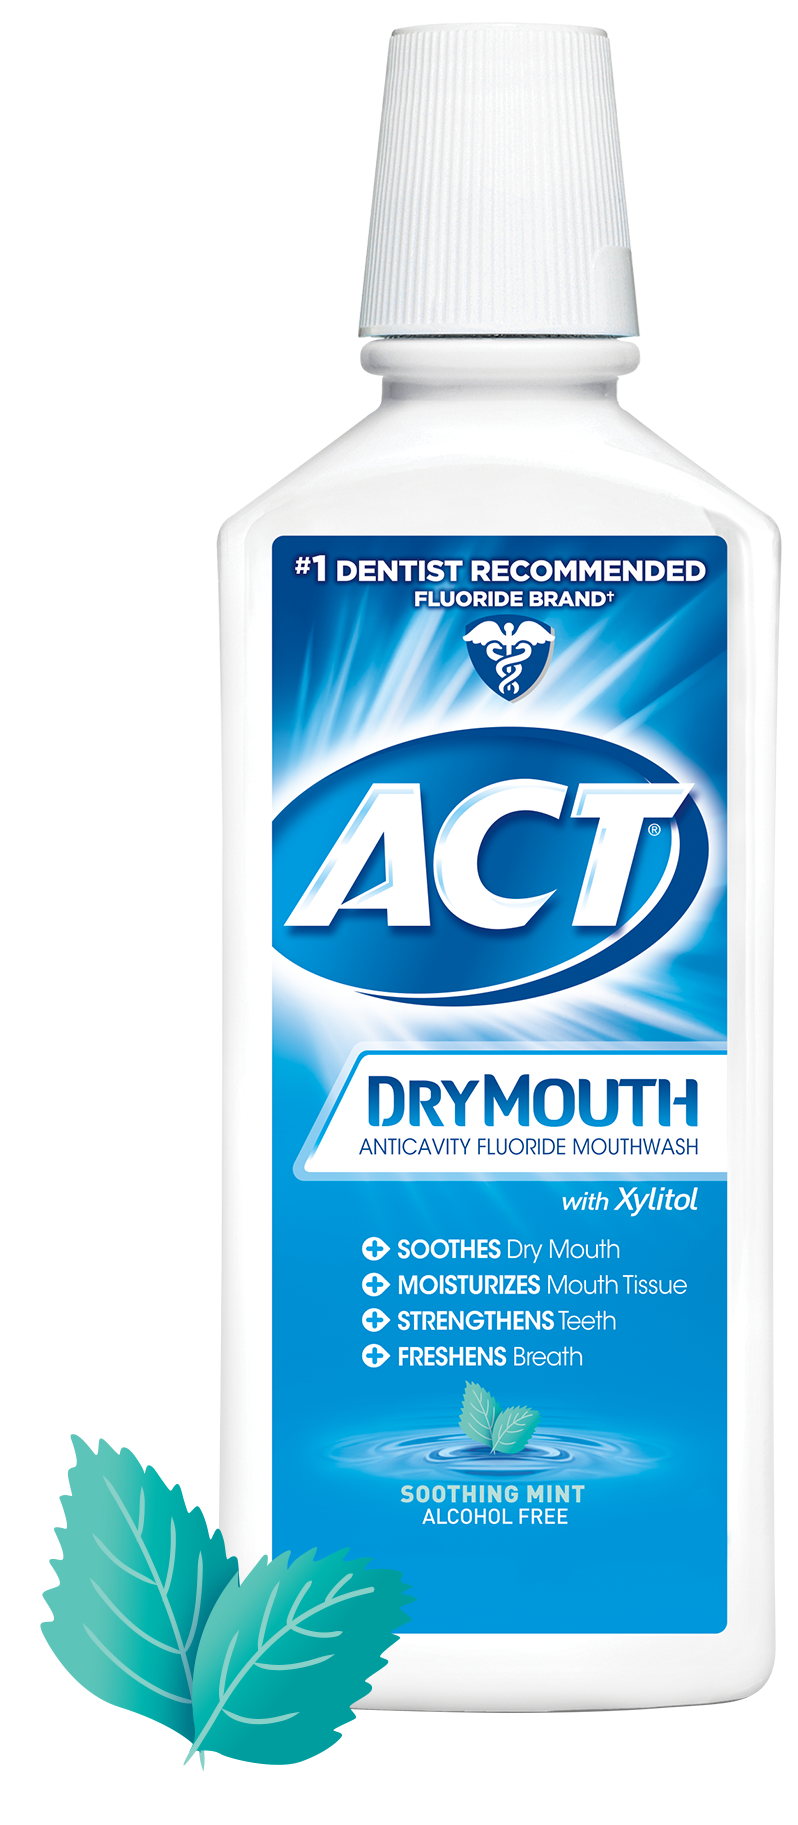 ACT® Dry Mouth Anticavity Fluoride Mouthwash